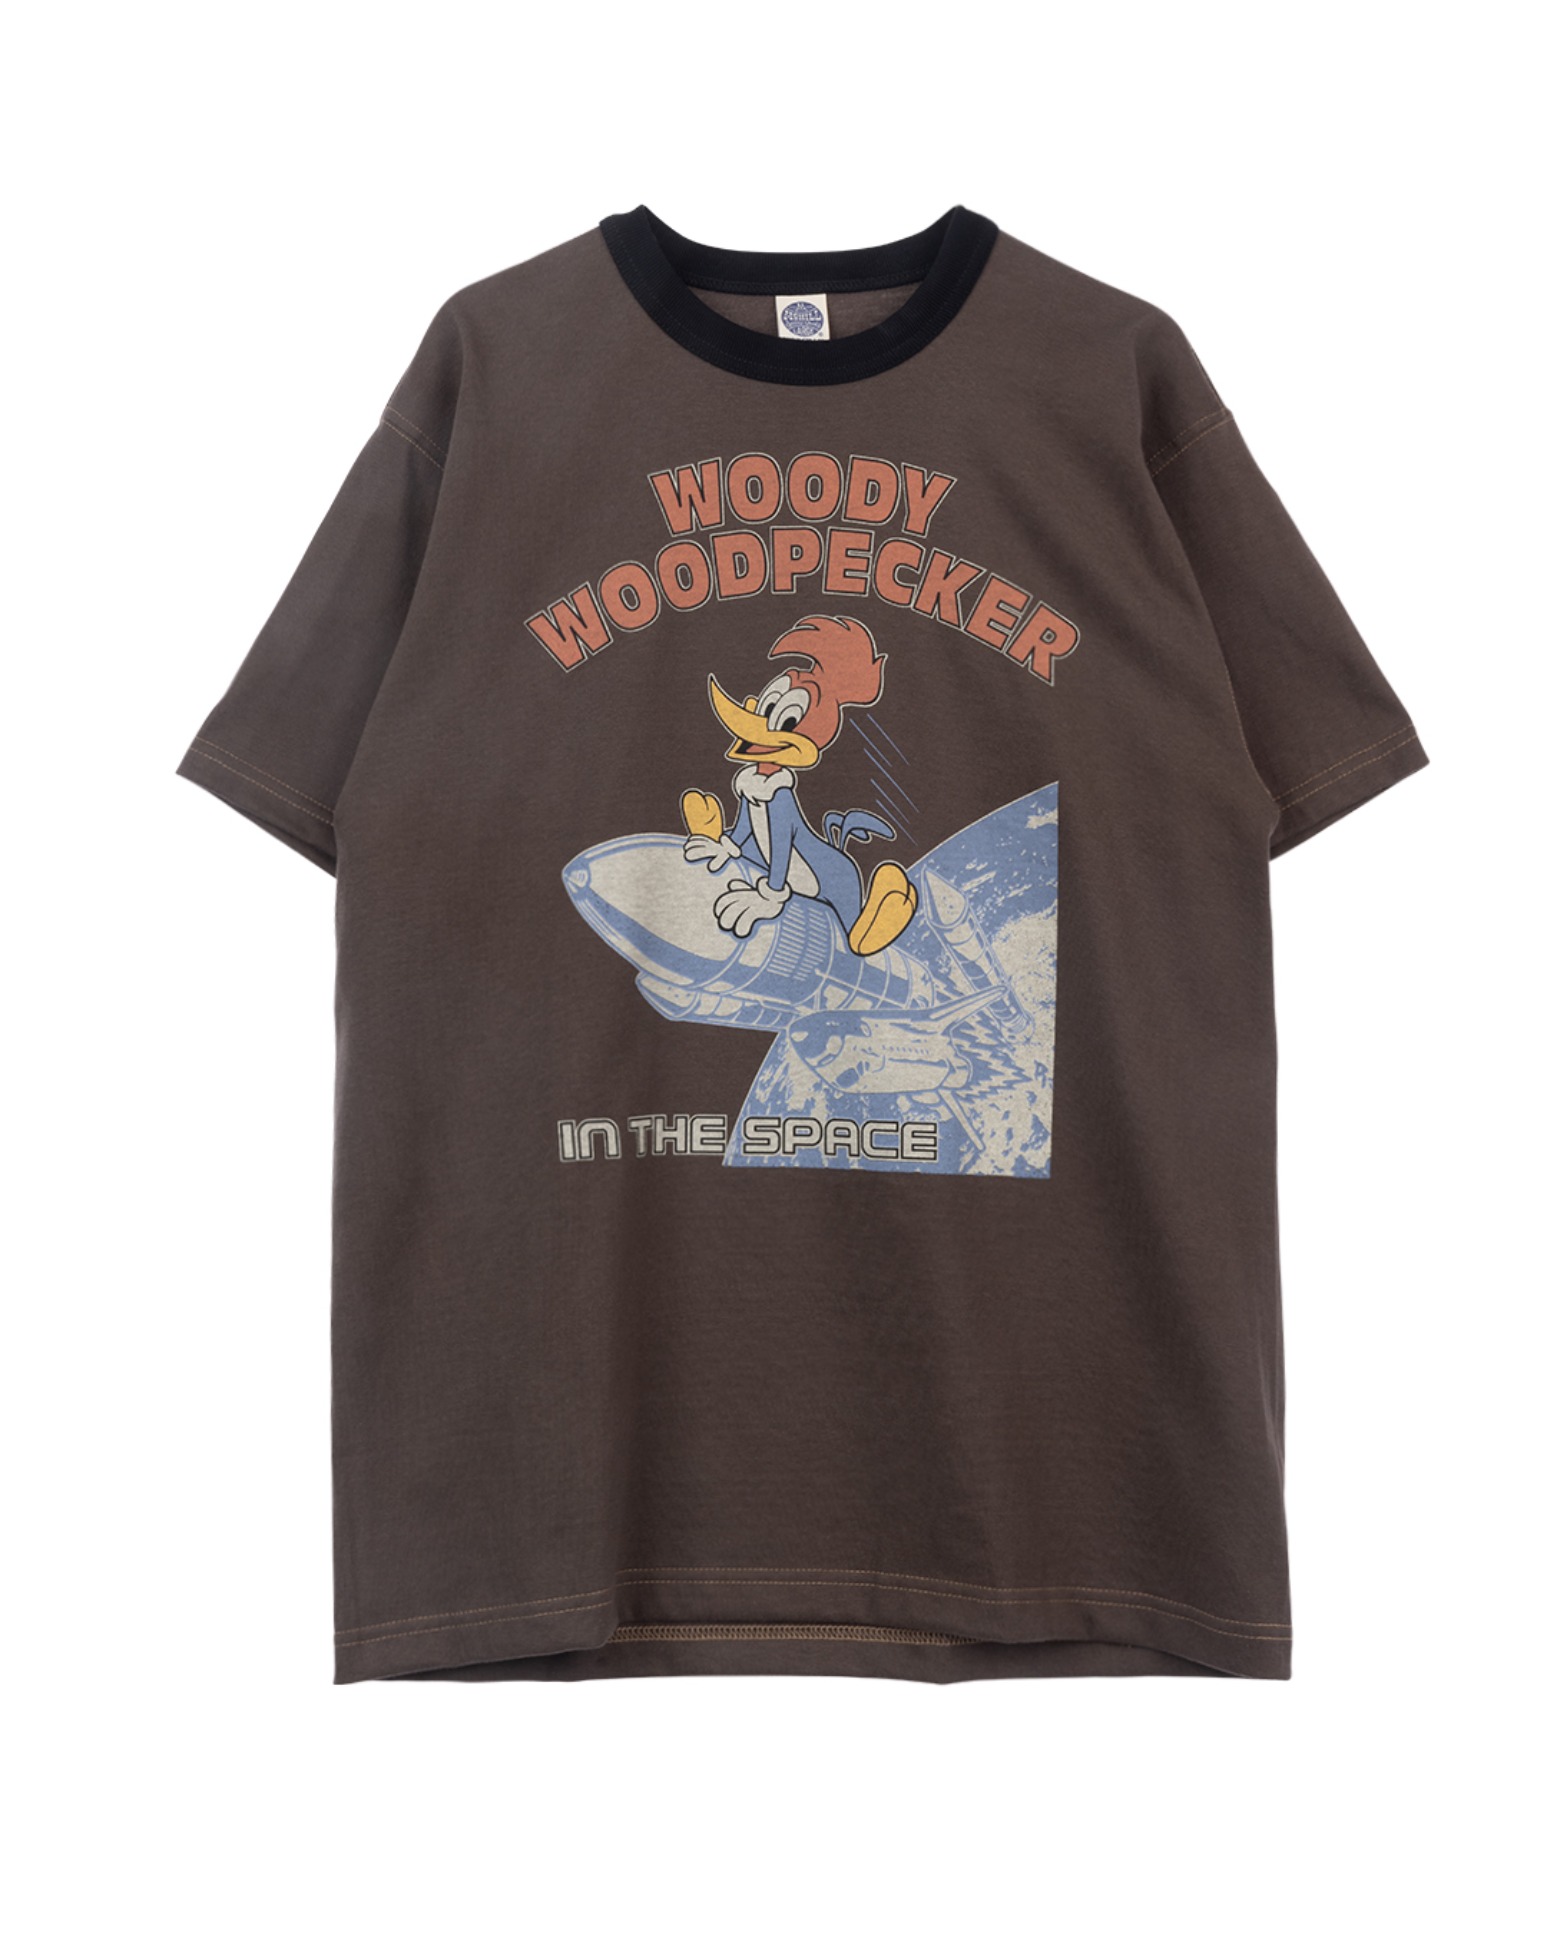 TMC2408 WOODY WOODPECKER TEE &quot;WOODY WOODPECKER IN THE SPACE&quot;(Charcoal)